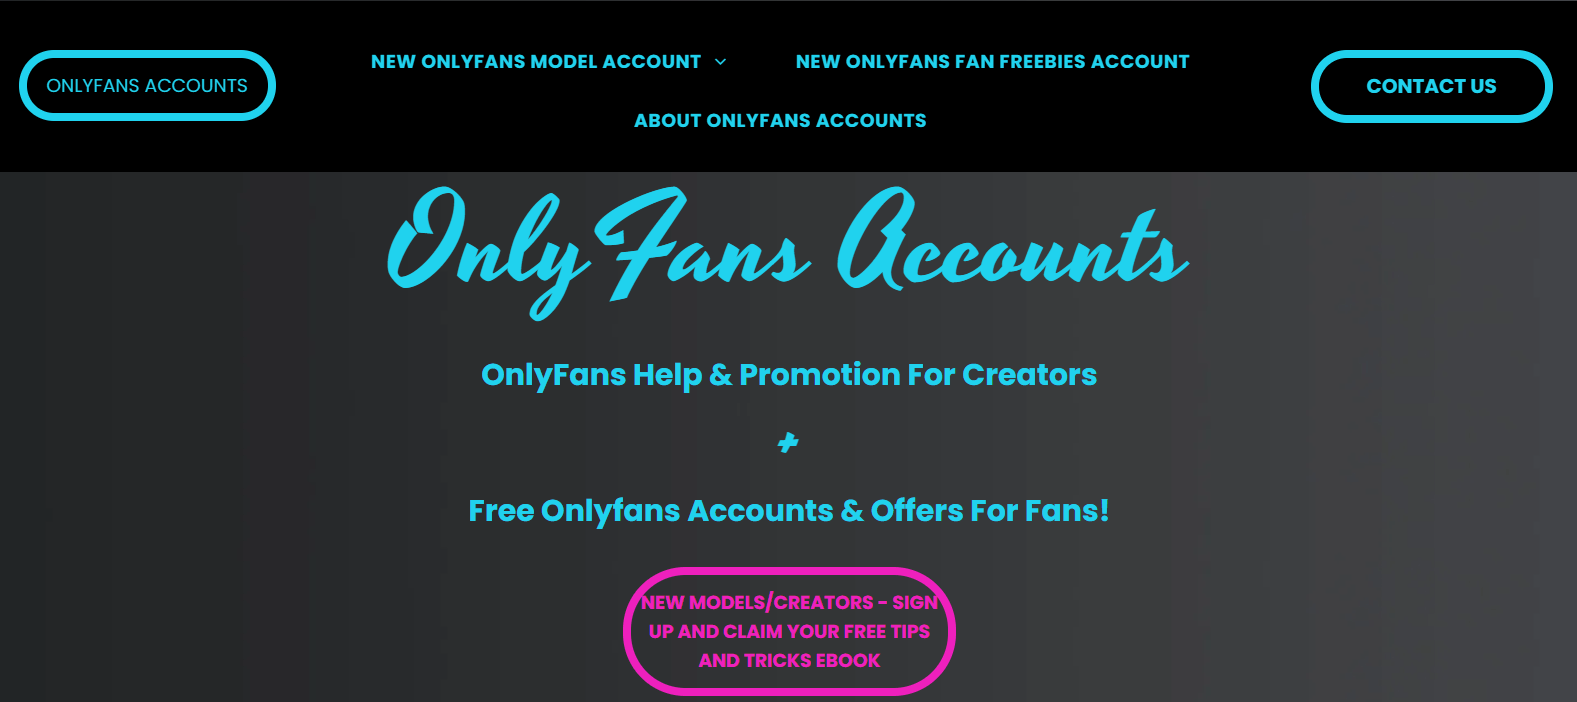 Onlyfans Accounts Homepage